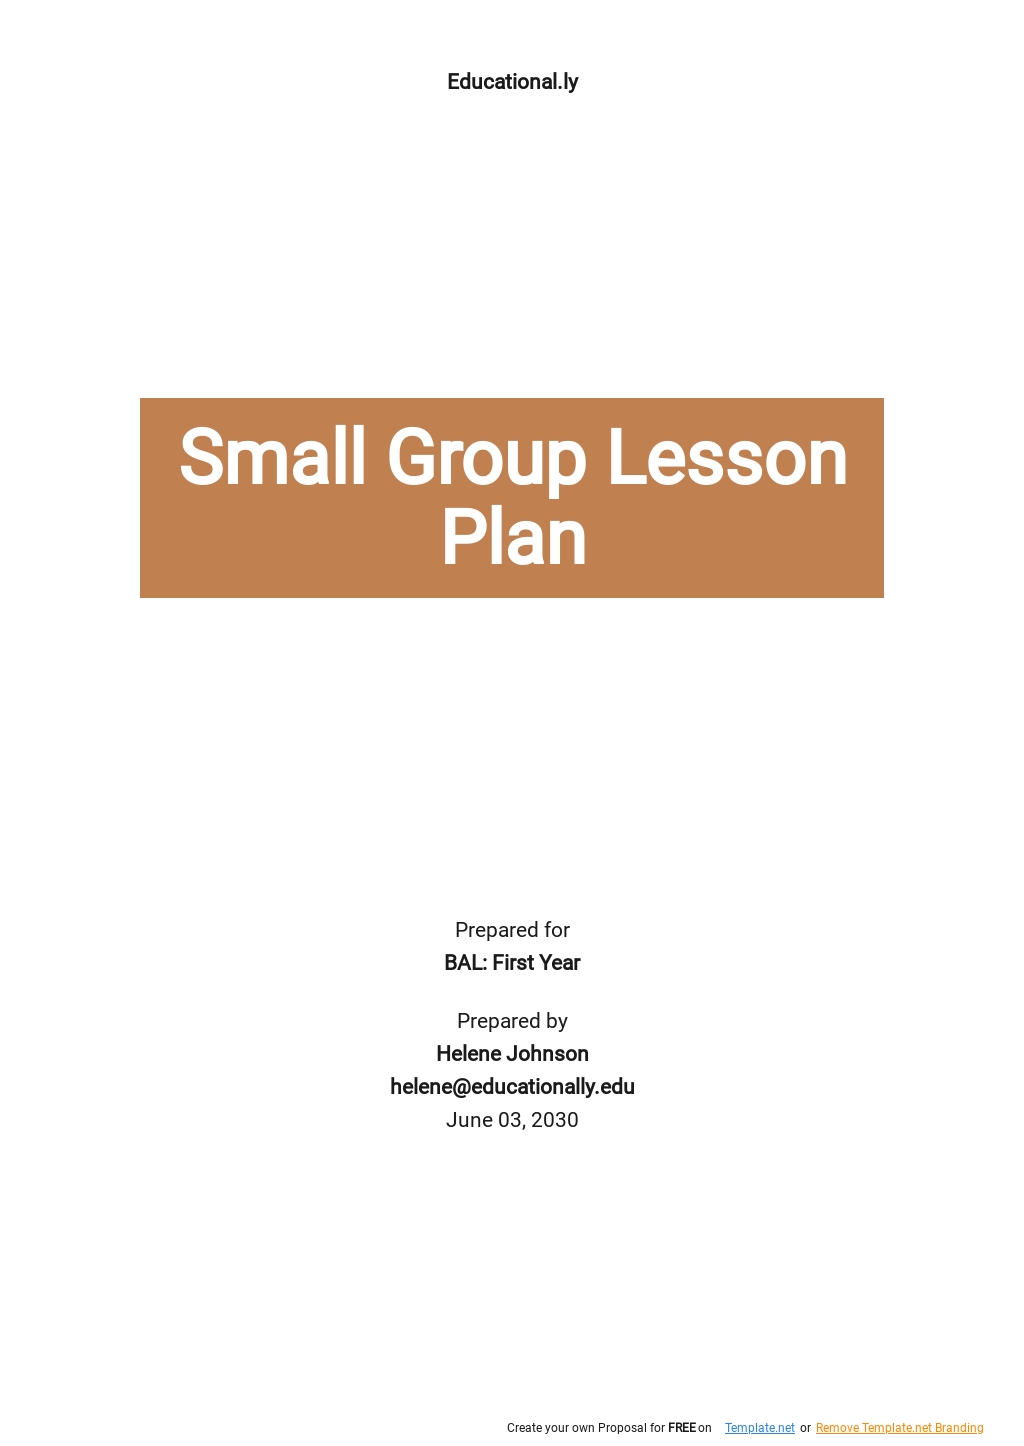 Small Group Counseling Lesson Plan Template Google Docs, Word, Apple